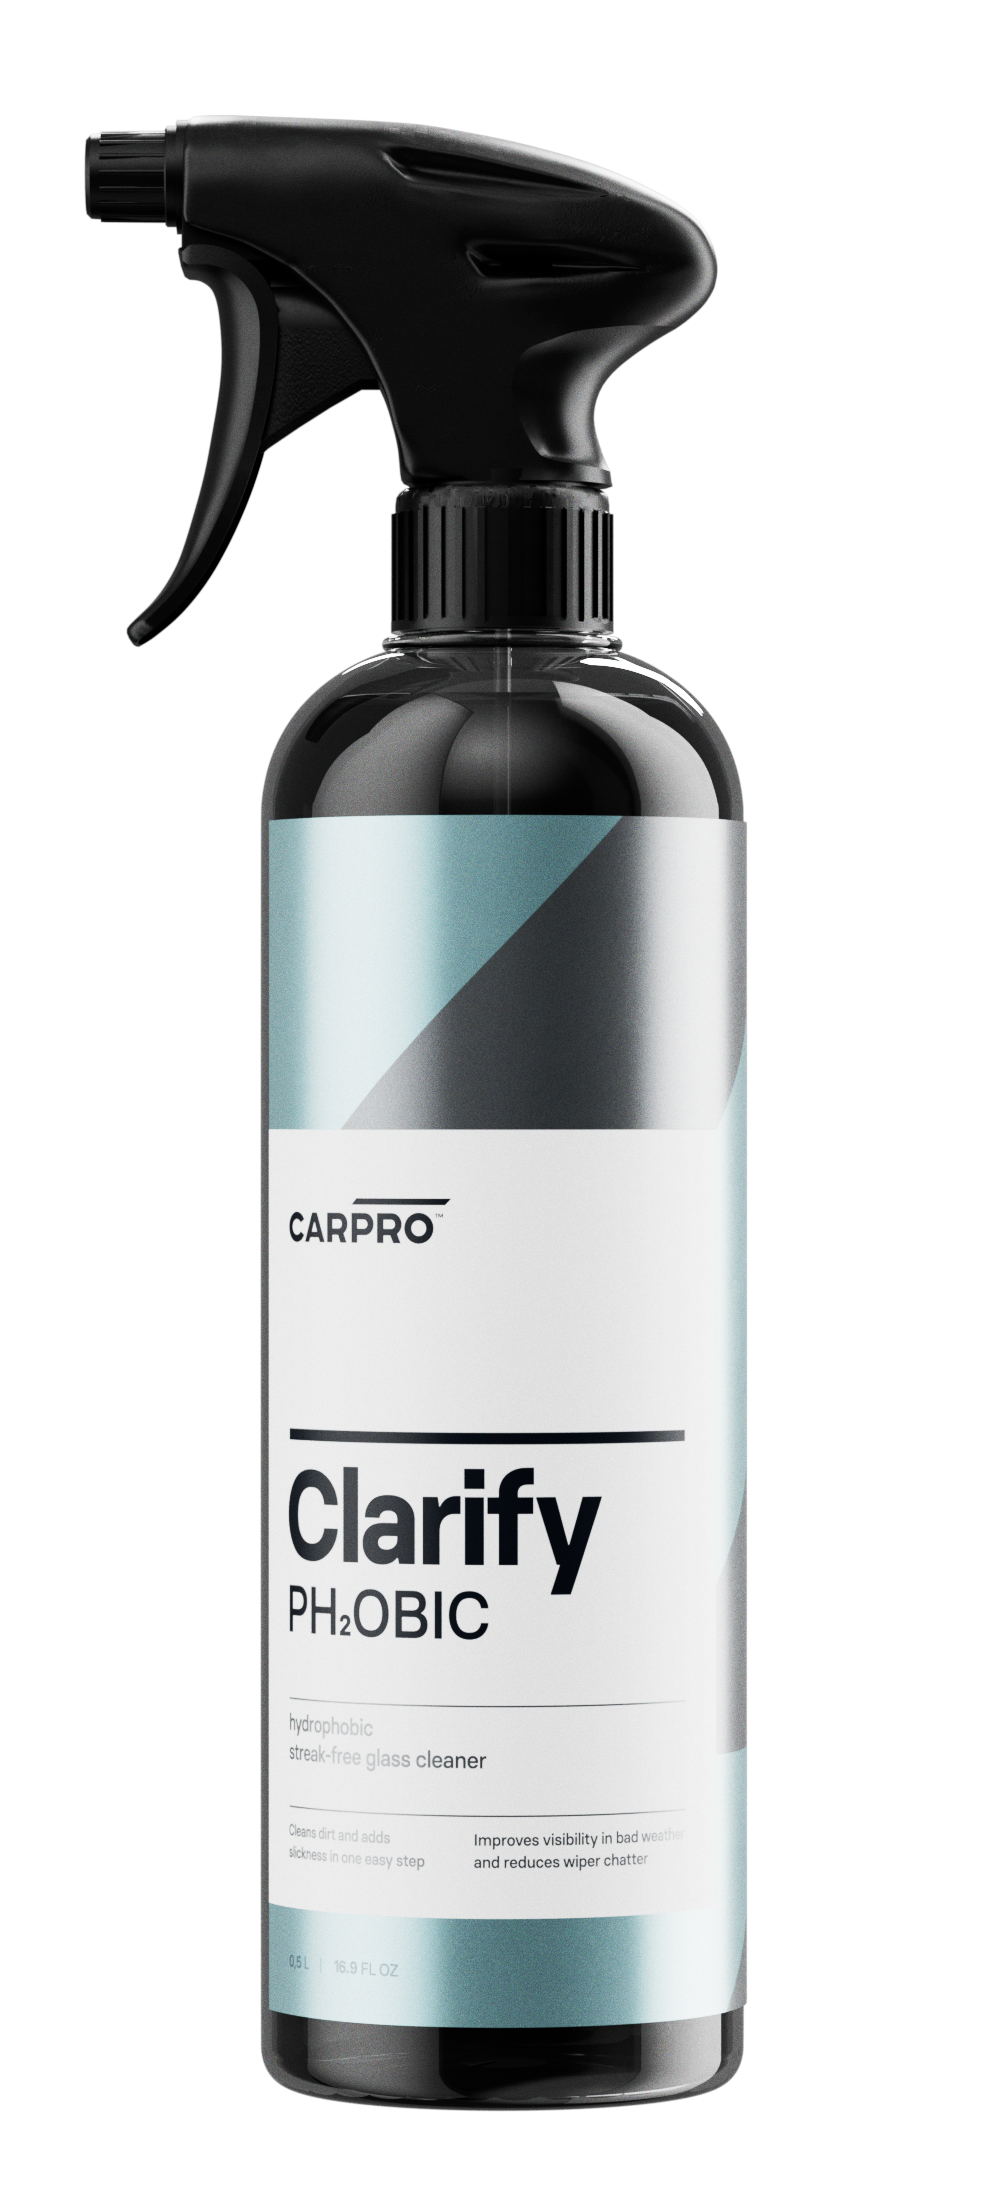 CARPRO - Clarify PH2OBIC 500ml (Window cleaner with protection)